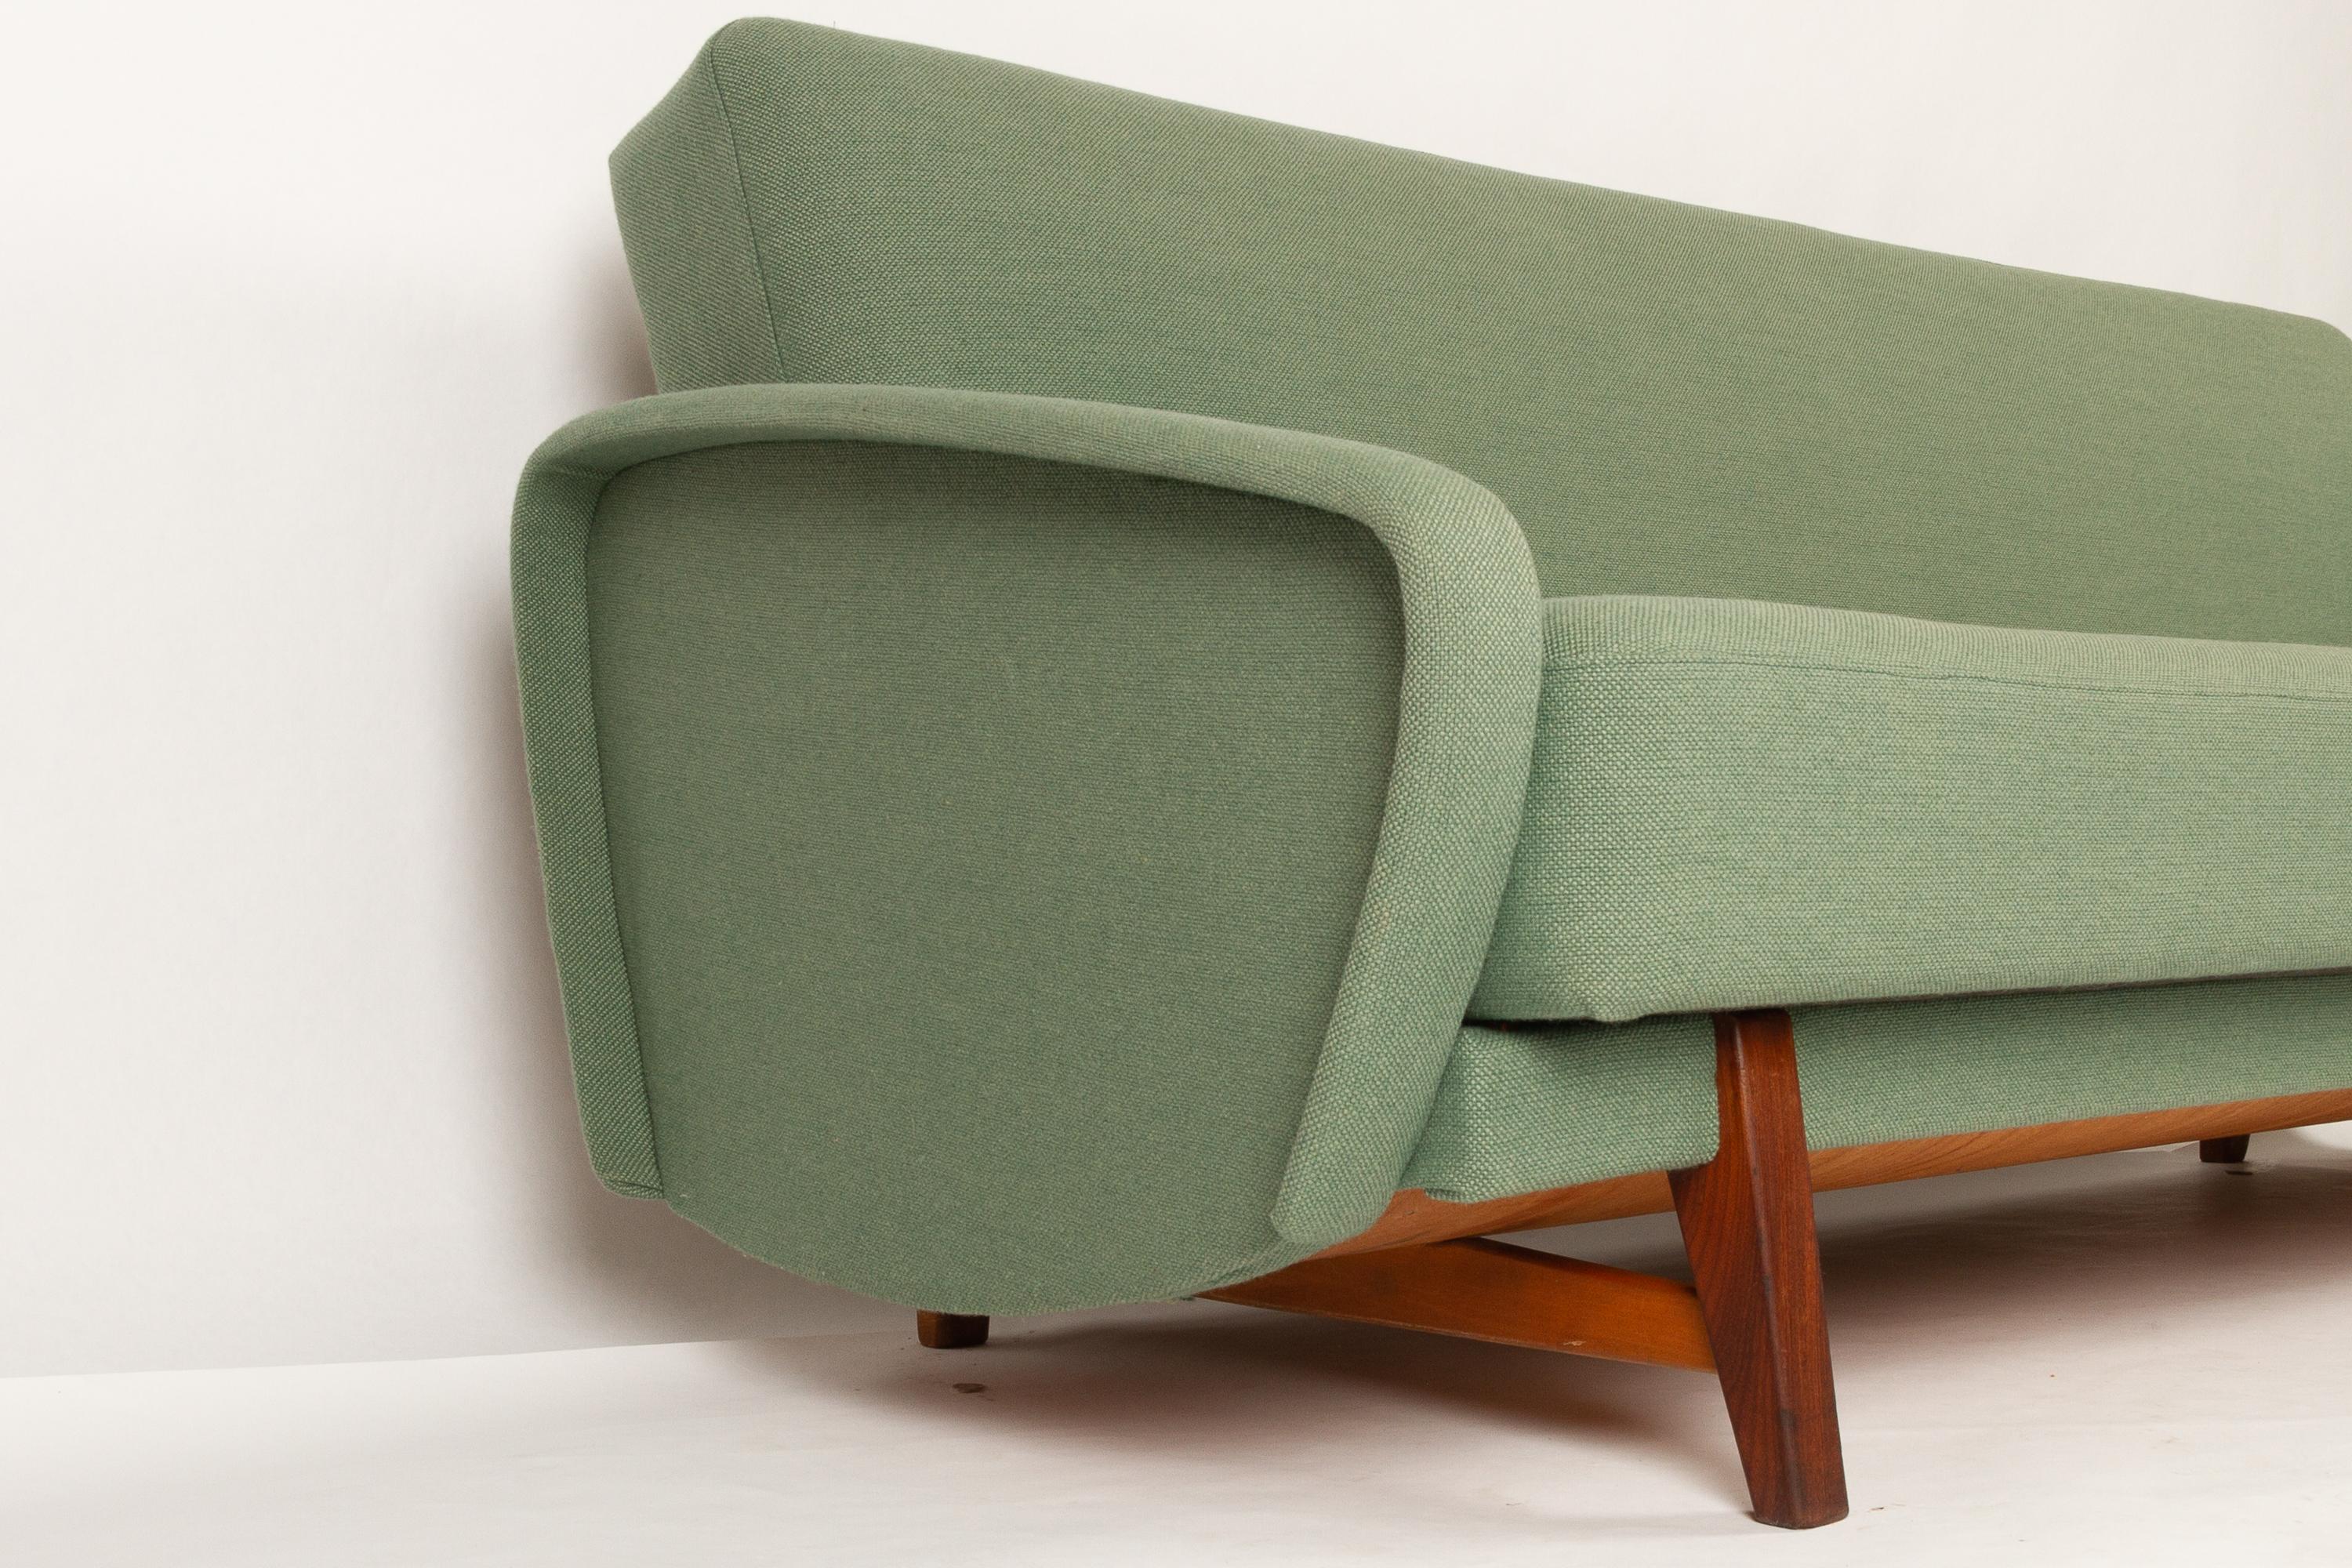 Danish vintage sofa, 1960s.
Classic Mid-Century Modern sofa bed, recently reupholstered in green Hallingdal wool from Danish textile manufacturer Kvadrat. Elegant armrests that curves from front to back. Narrow tapering legs gives this sofa a light